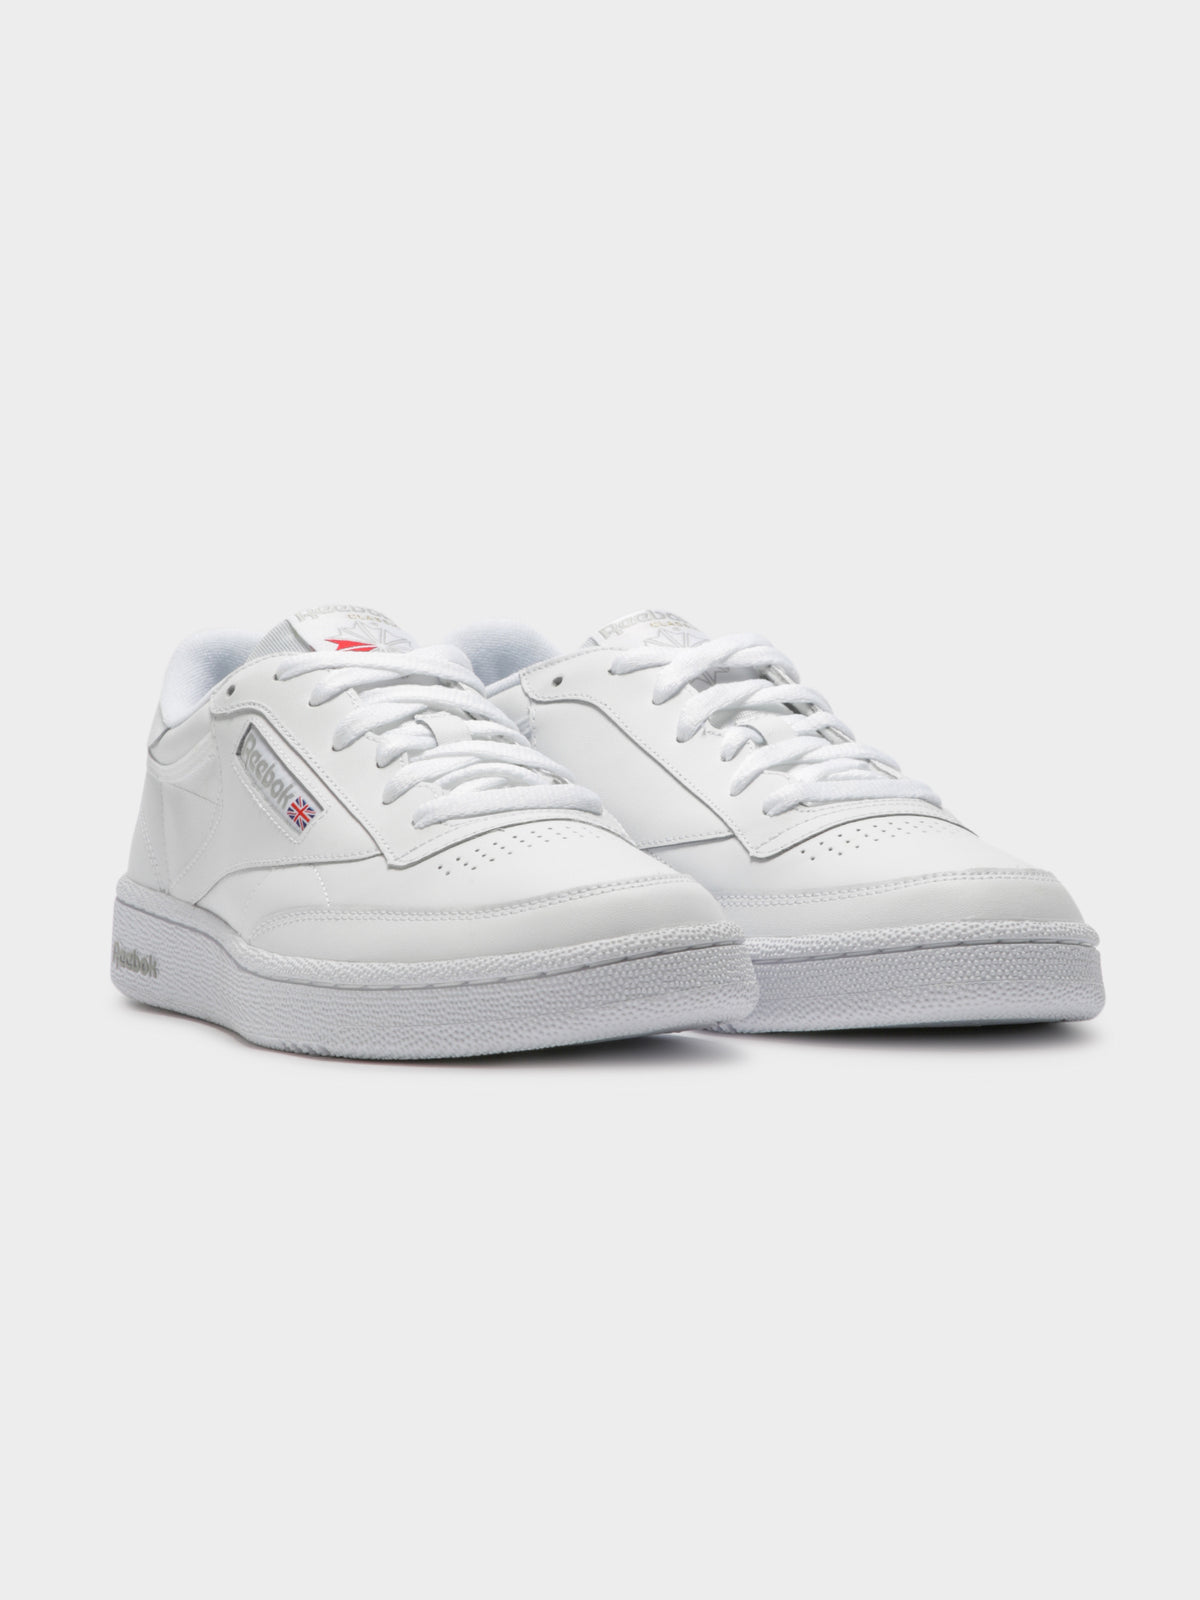 Unisex Club C 85 Sneakers in White &amp; Grey Leather